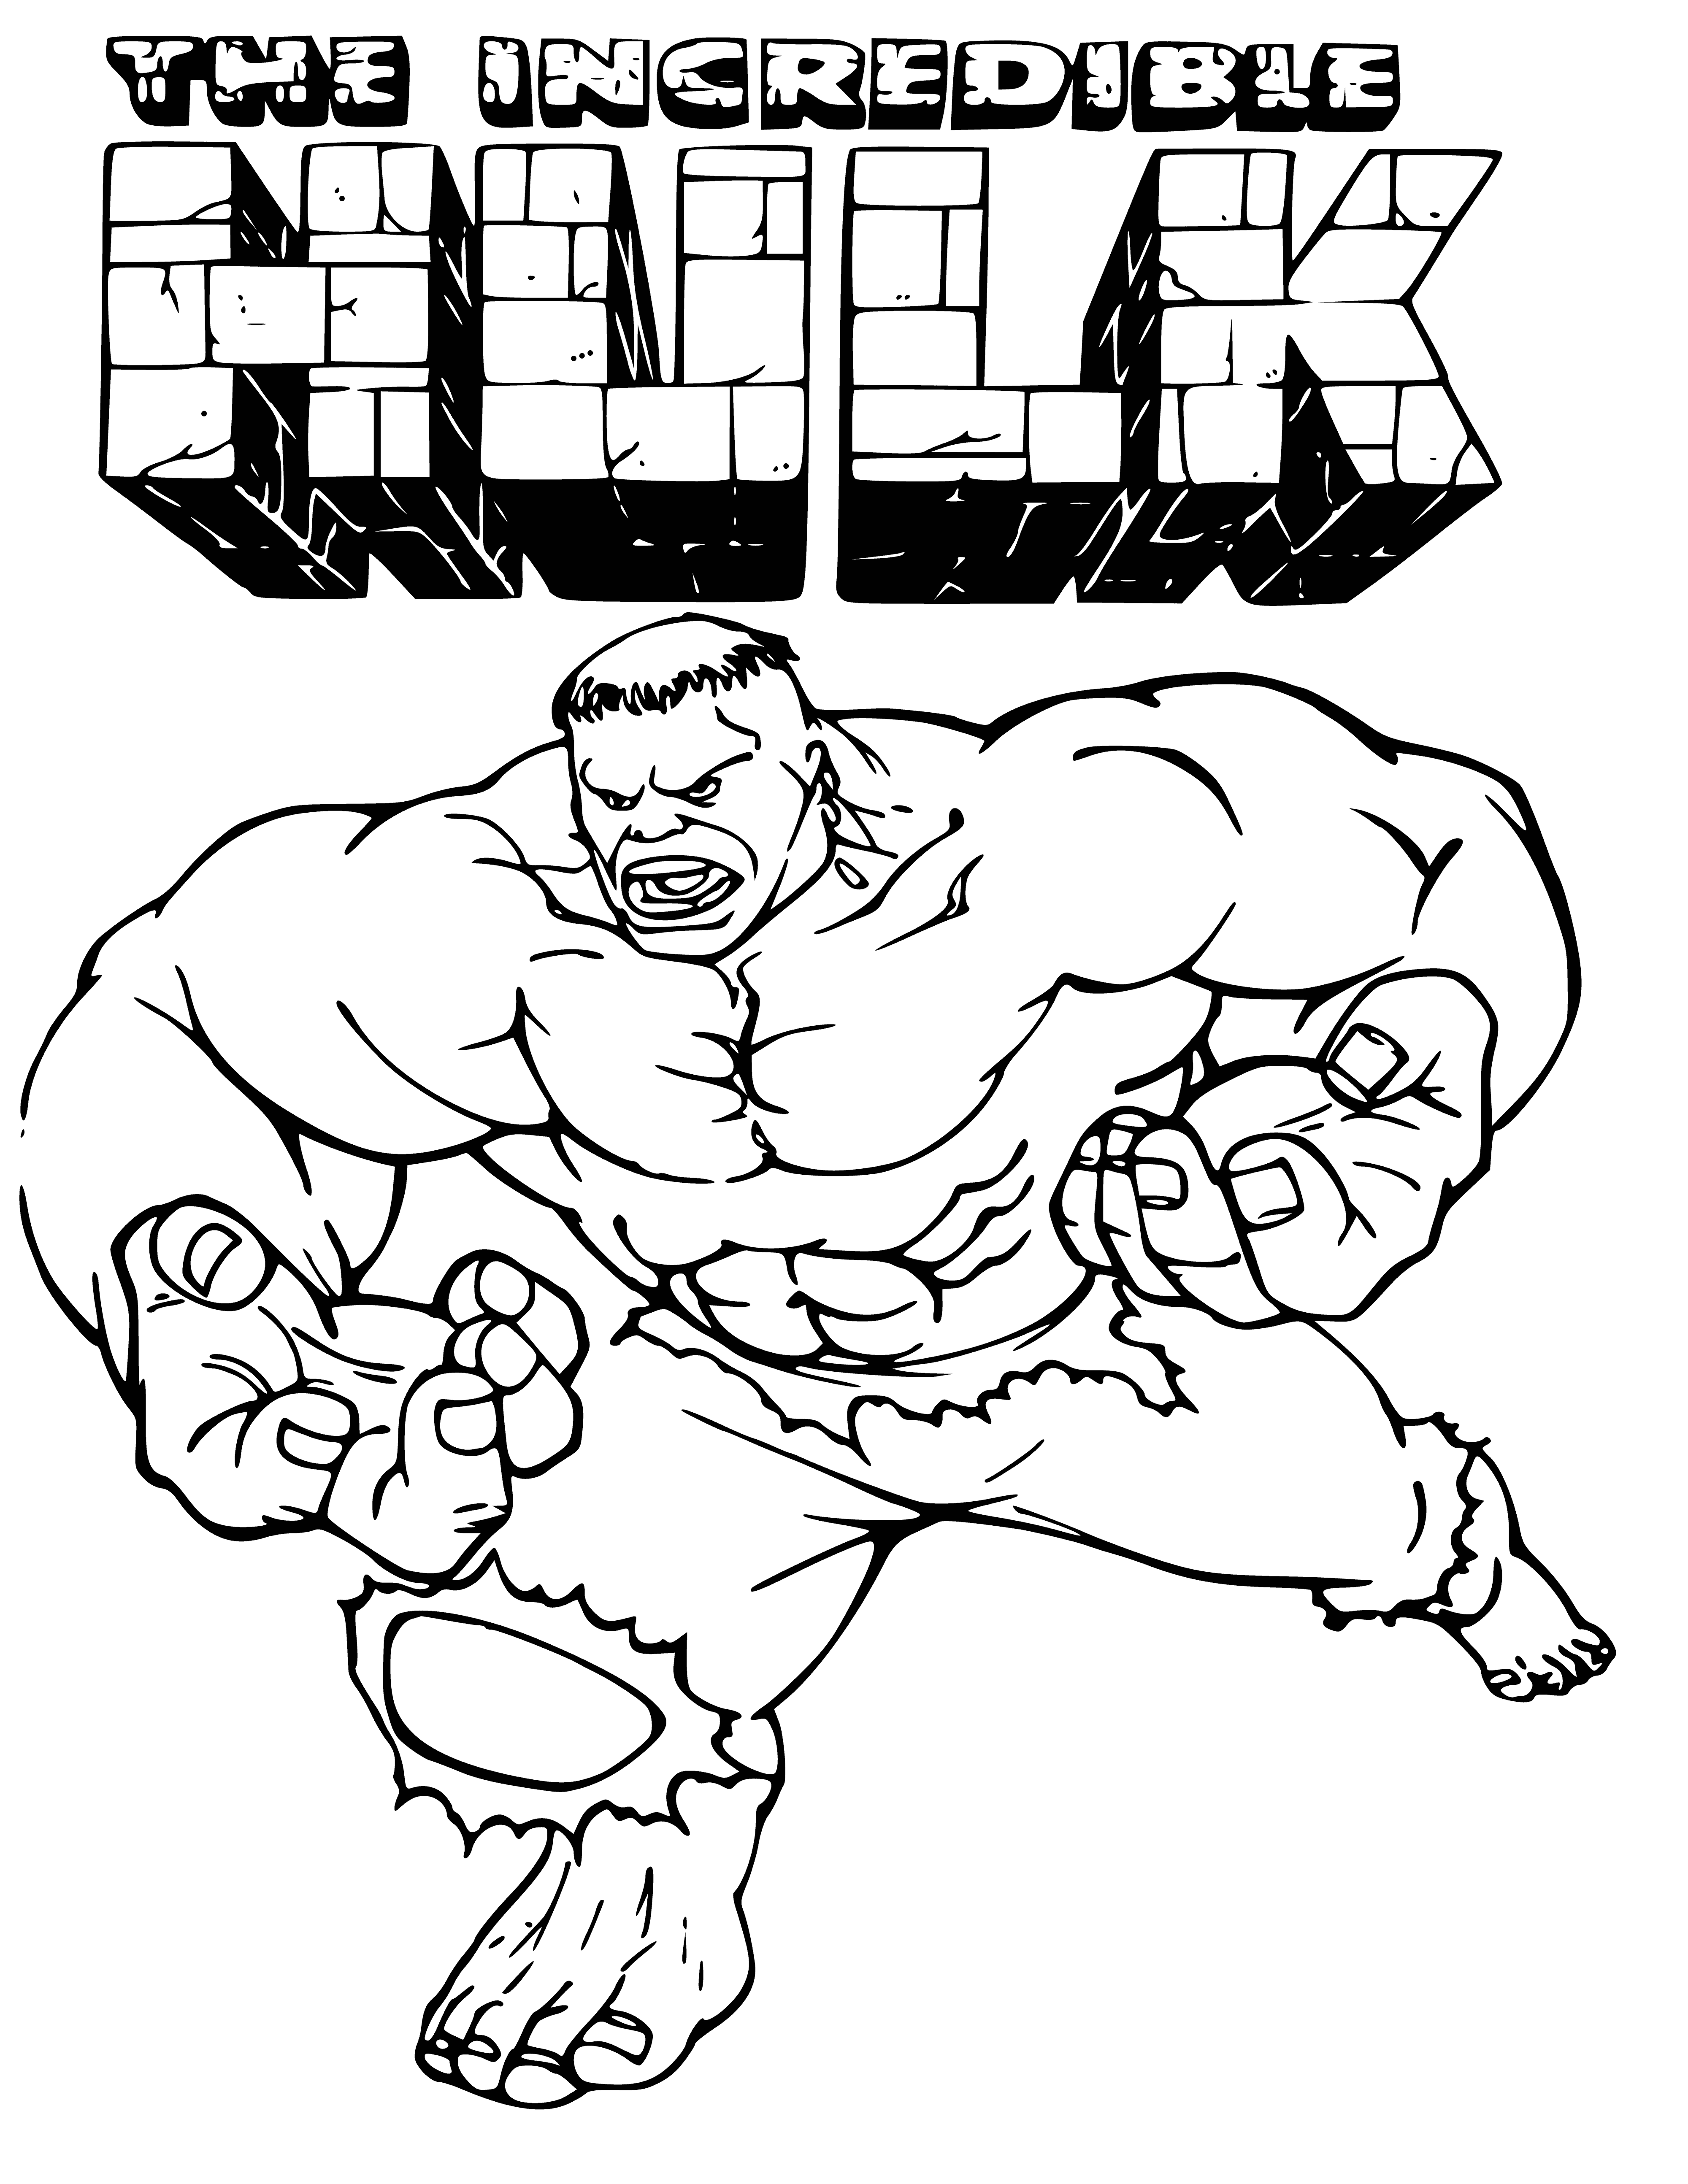 coloring page: The Hulk is a powerful and muscular green superhero with red eyes and sharp teeth. He wears a purple shorts and big belt, can jump high and is super strong! #TheIncredibleHulk